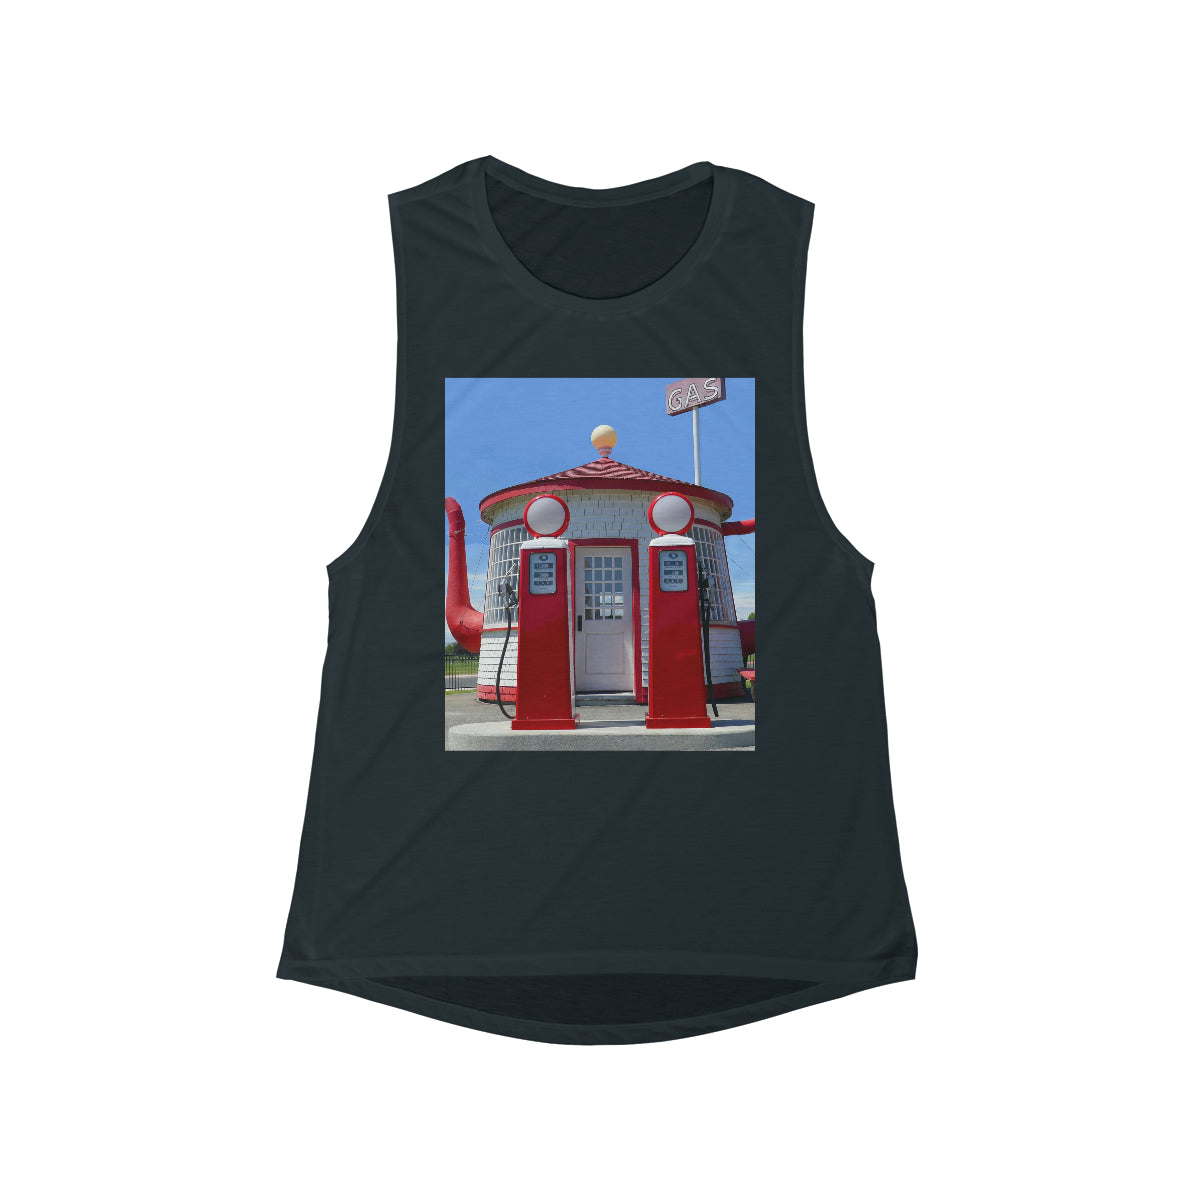 Awesome Teapot Dome Service Station - Women's Flowy Scoop Muscle Tank - Fry1Productions